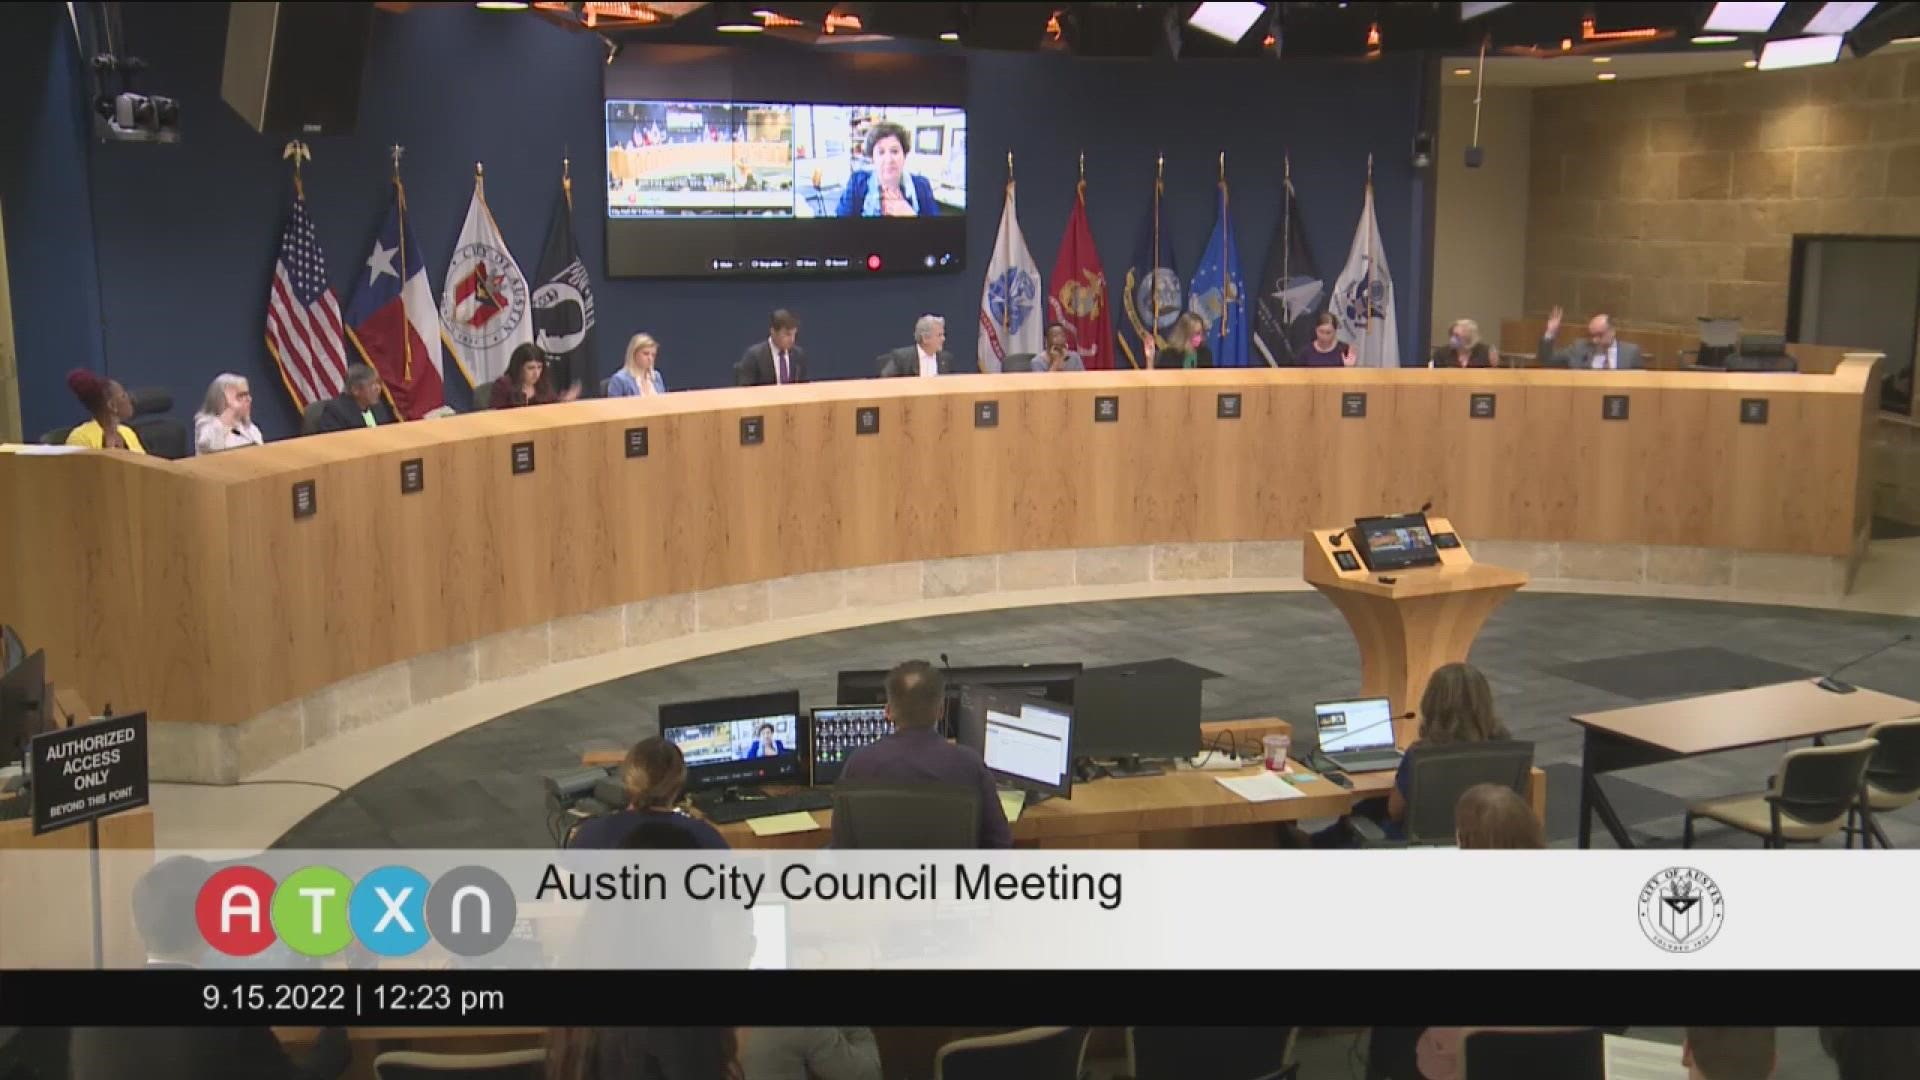 The resolution was authored by Austin City Council Member Mackenzie Kelly.